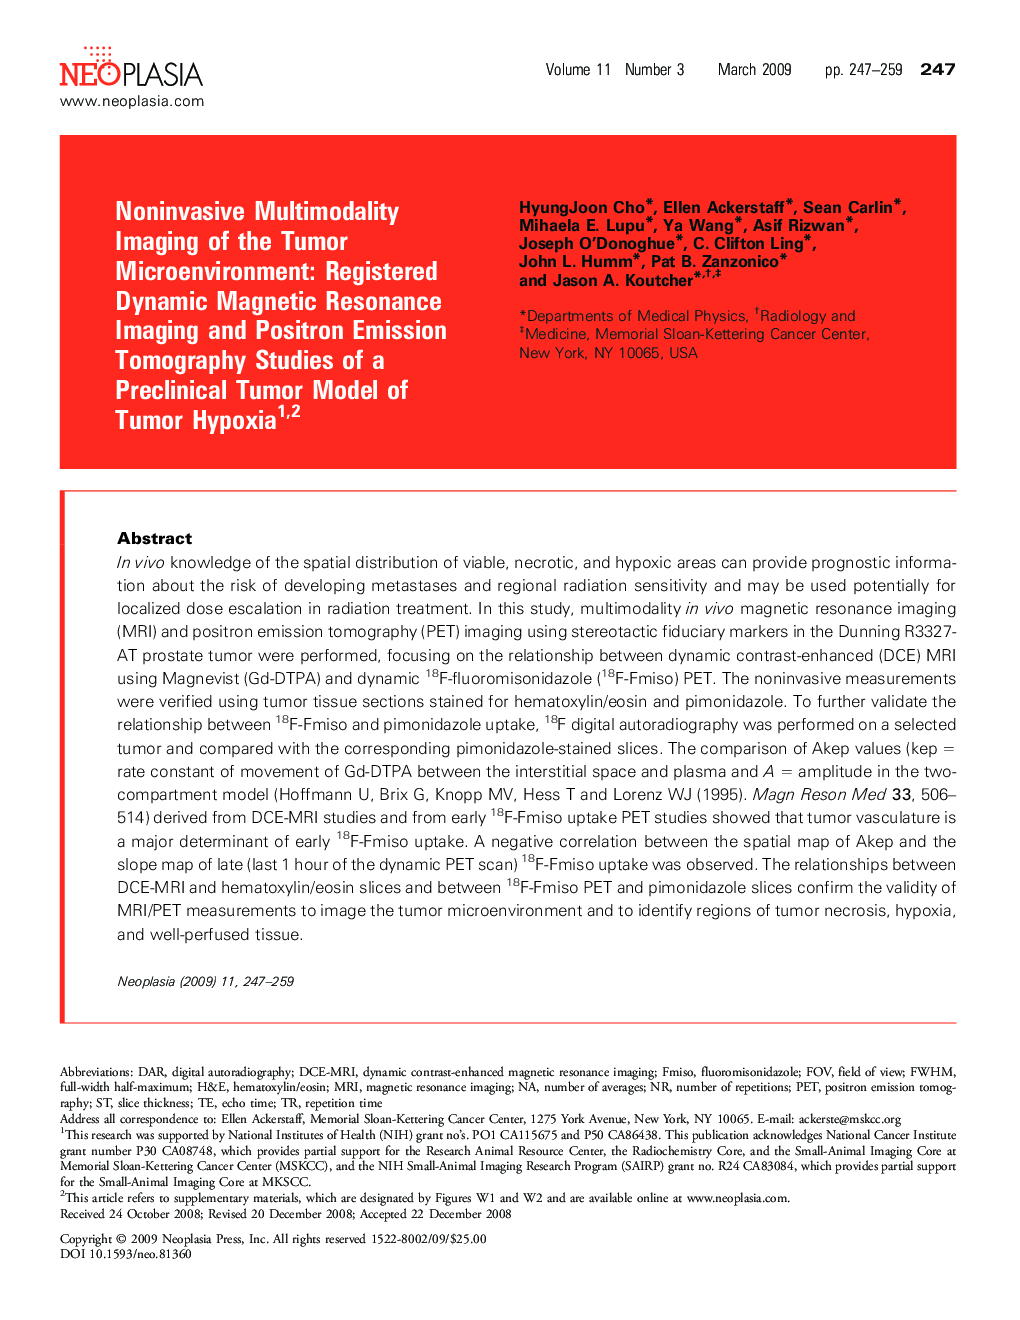 Noninvasive Multimodality Imaging of the Tumor Microenvironment: Registered Dynamic Magnetic Resonance Imaging and Positron Emission Tomography Studies of a Preclinical Tumor Model of Tumor Hypoxia